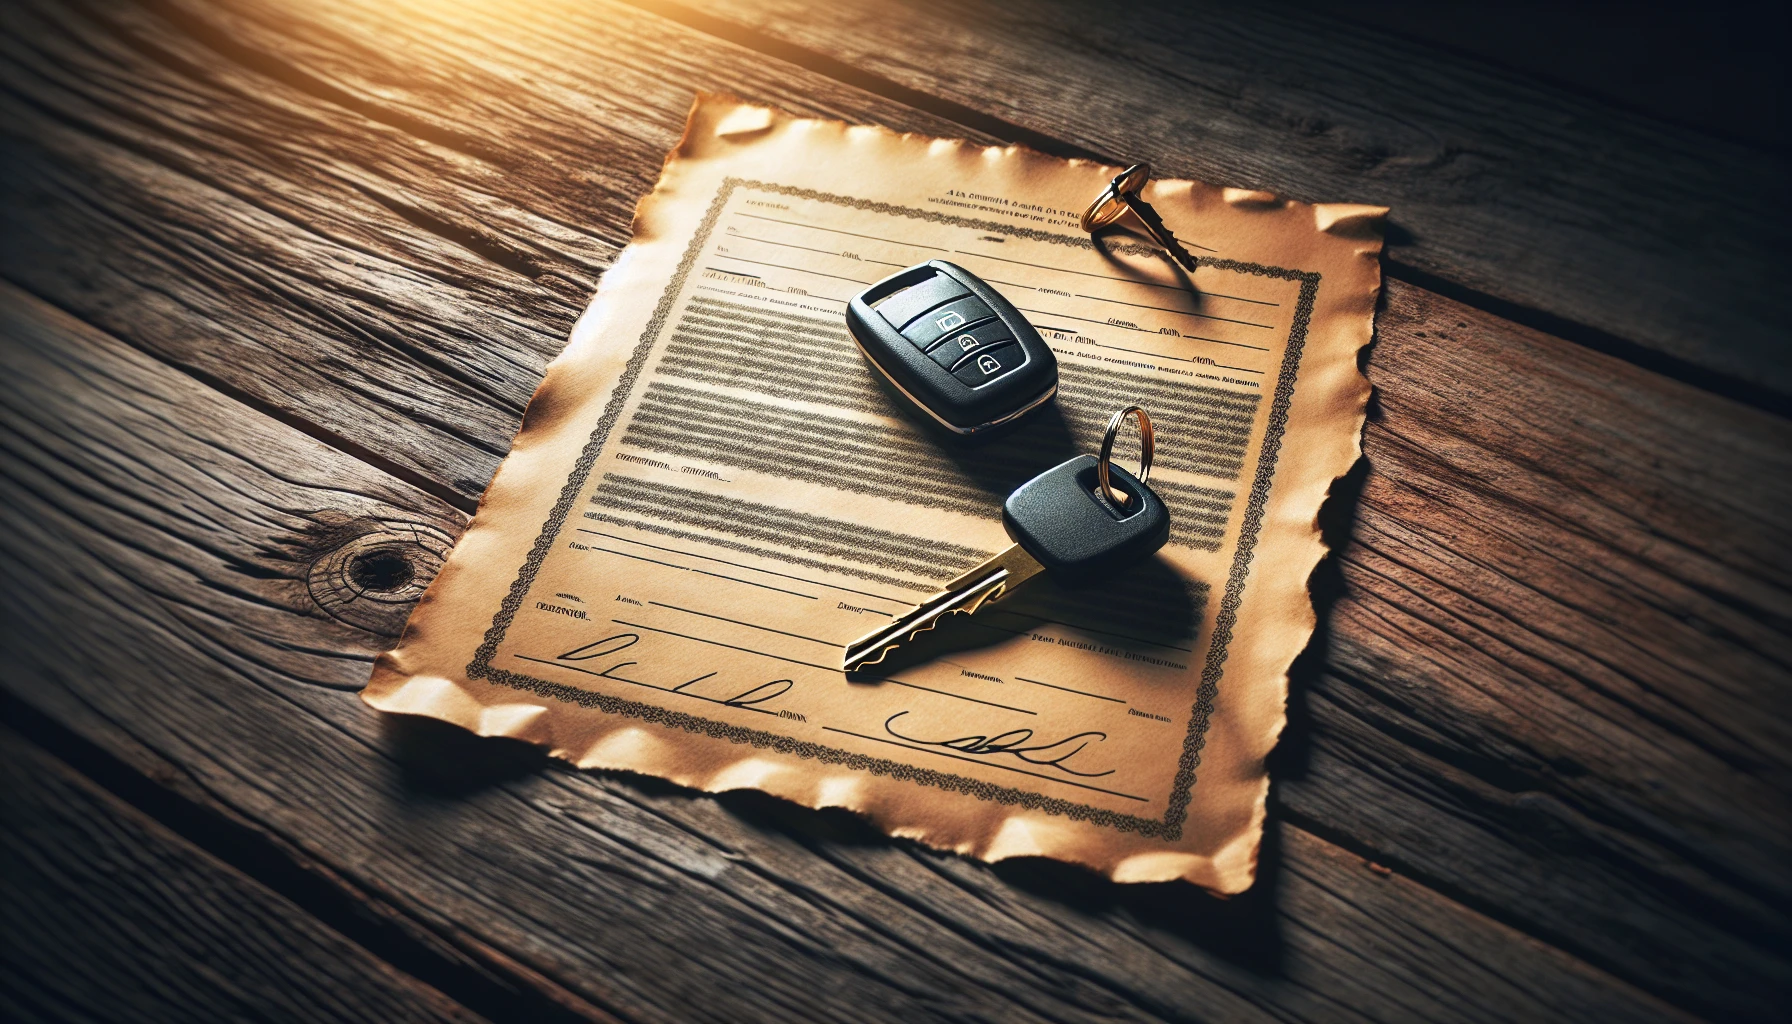 Car title and keys on a wooden table